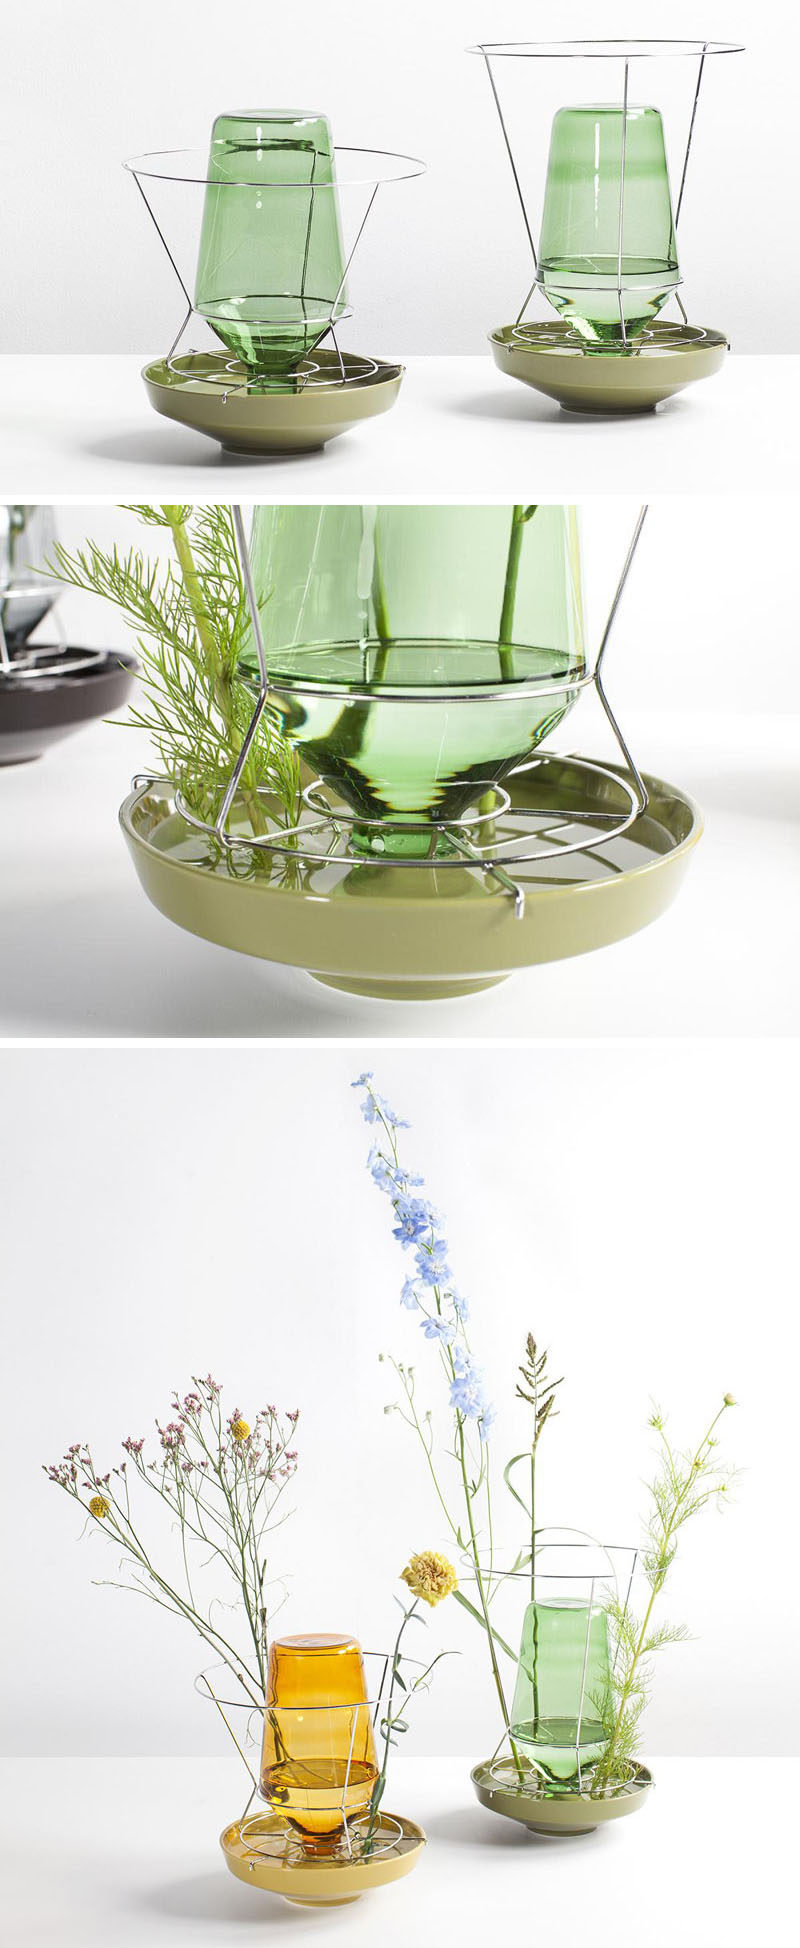 Rotterdam-based designer Chris Kabel has created a collection of contemporary glass, metal and ceramic vases that show off the stems of the flowers, instead of hiding them away.